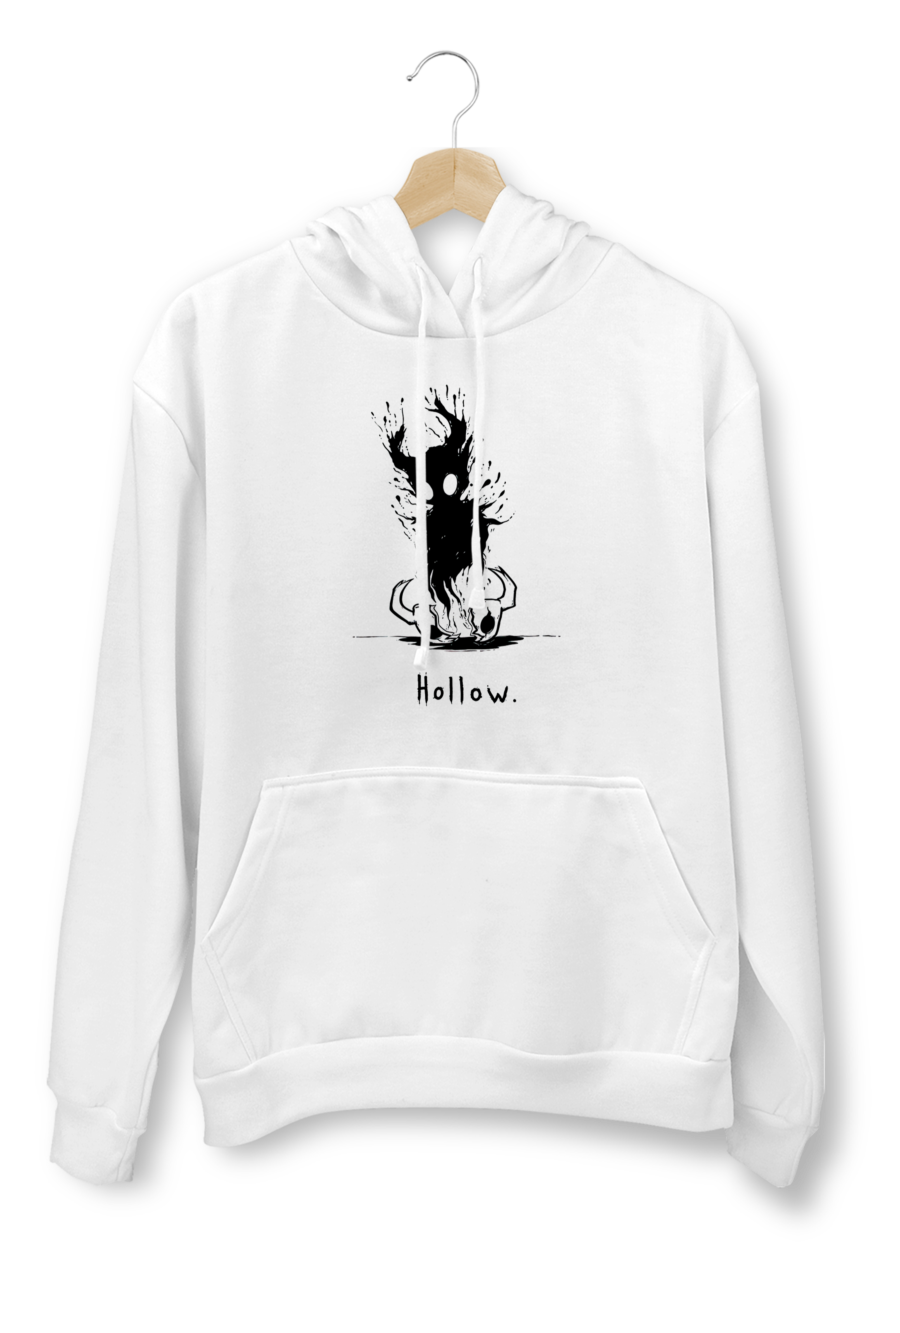 Dark Soul Hoodie Graphic Tee for Strength and Resilience